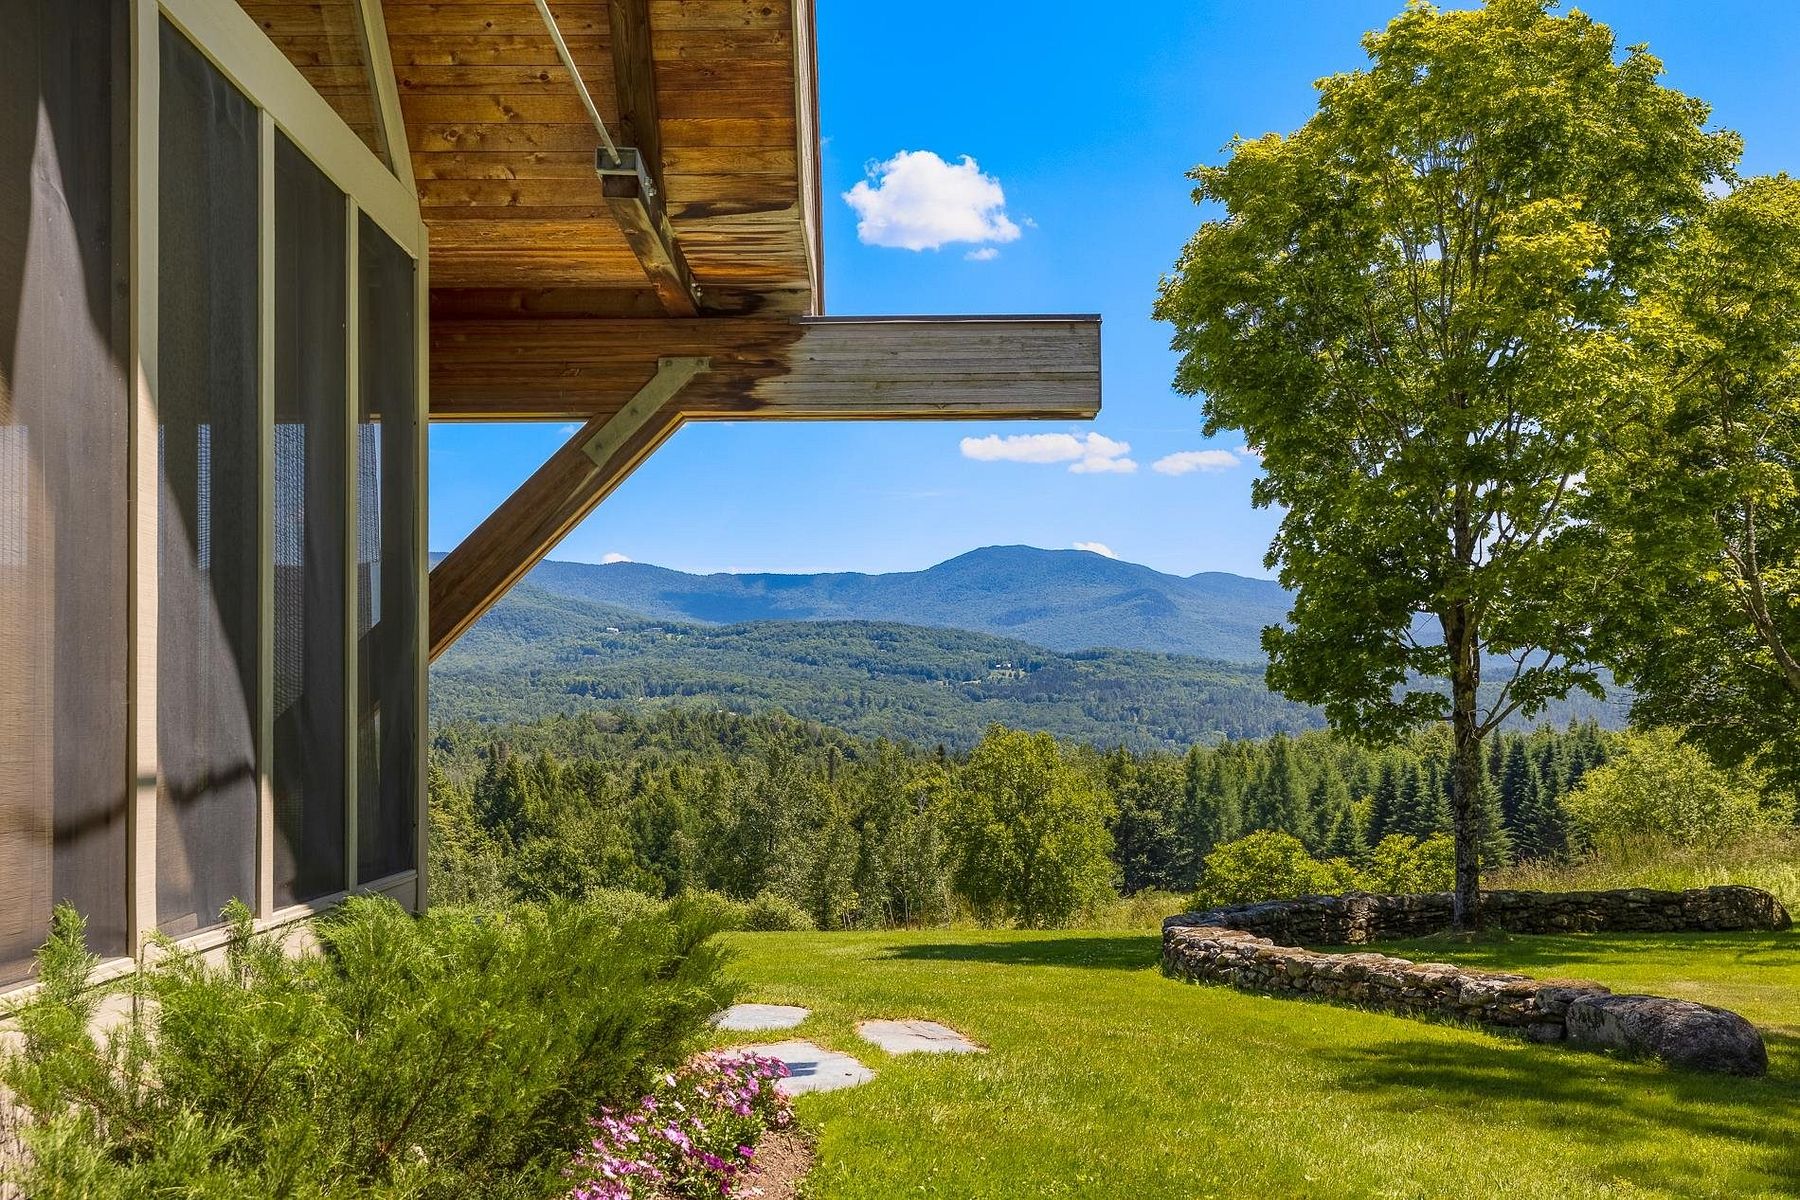 239 Acres of Land with Home for Sale in Stowe, Vermont